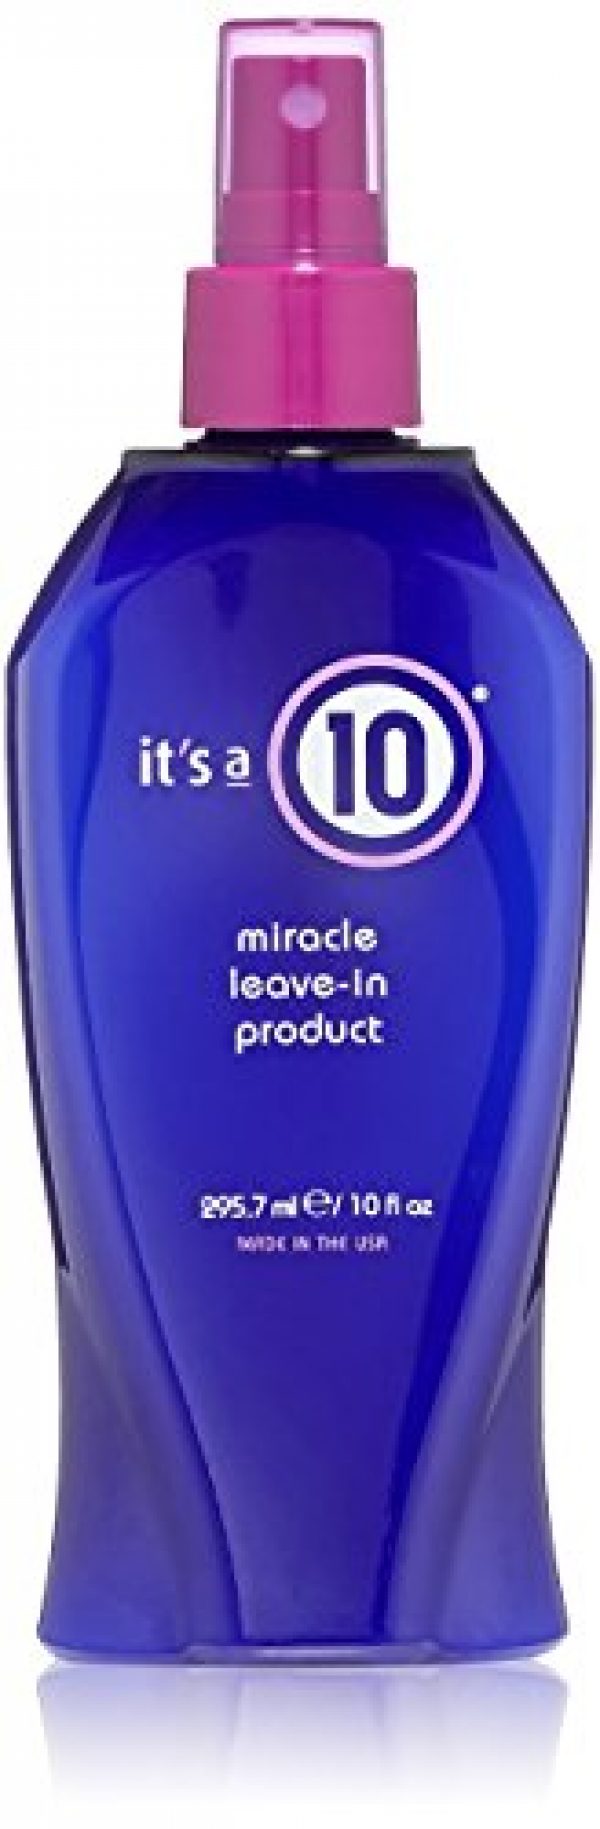 It's A 10 Haircare Miracle Leave-In Conditioner Spray - 10 oz. - 1ct 9